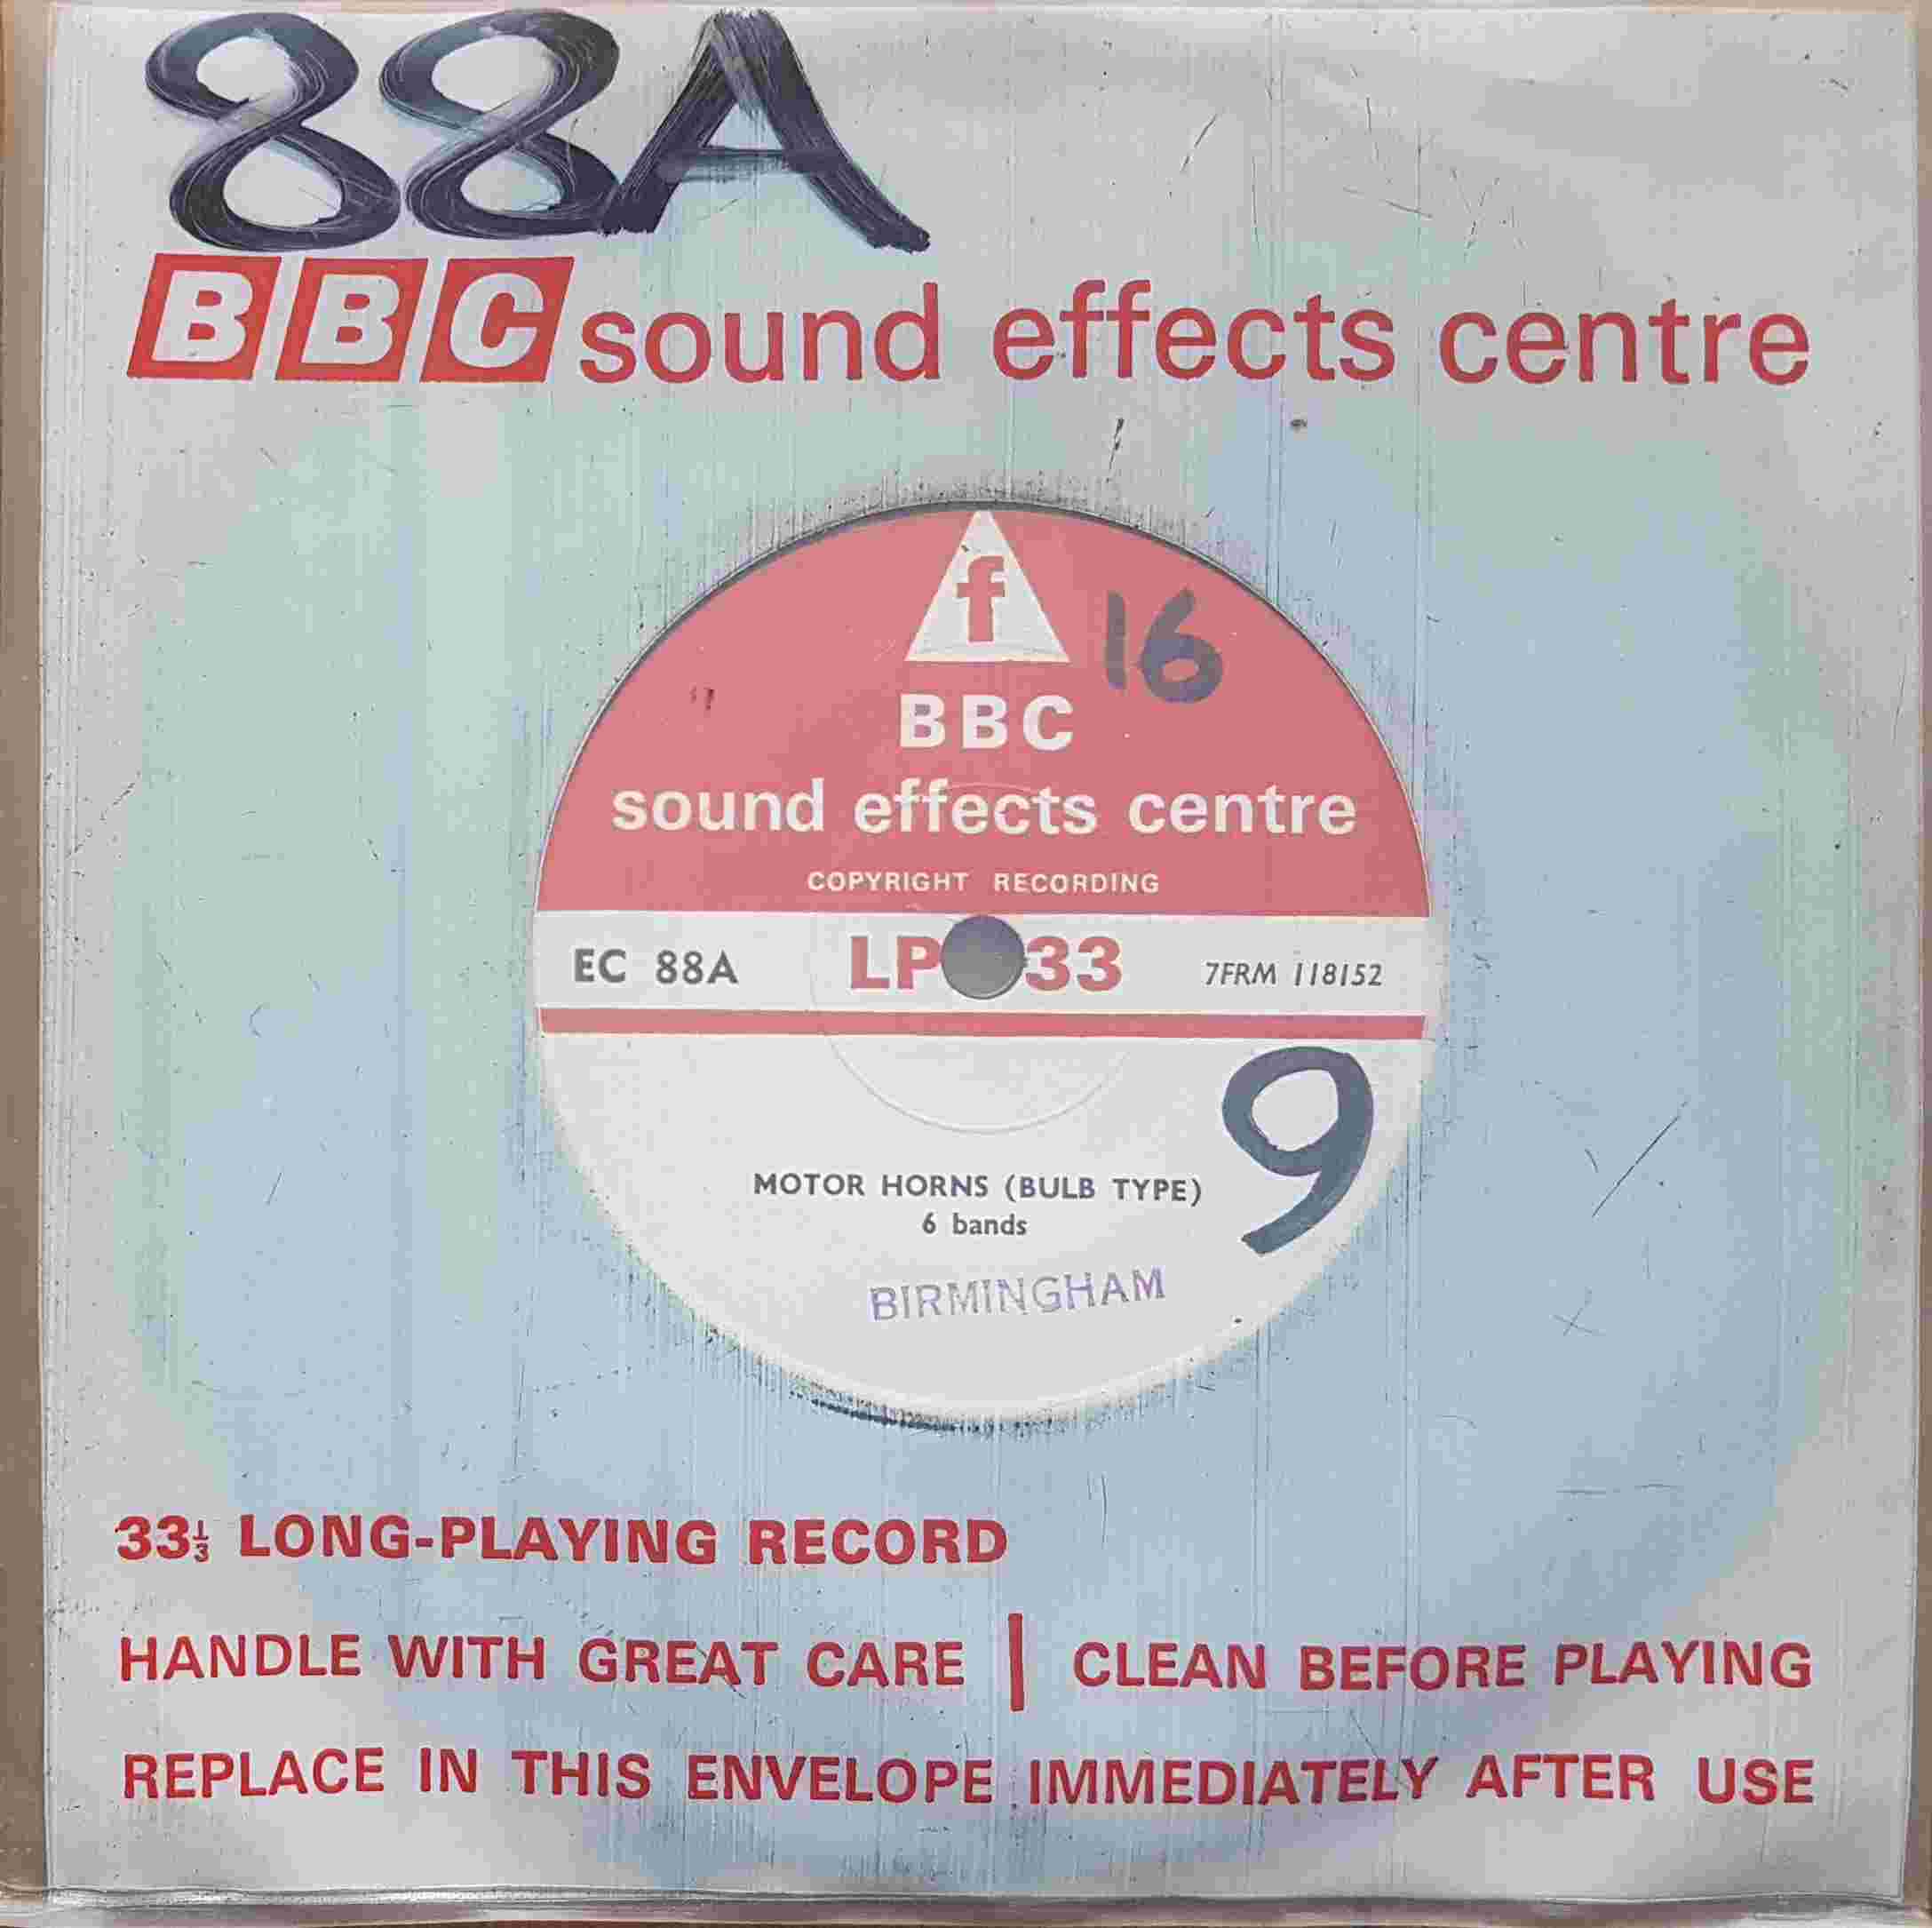 Picture of EC 88A Motor horns by artist Not registered from the BBC singles - Records and Tapes library